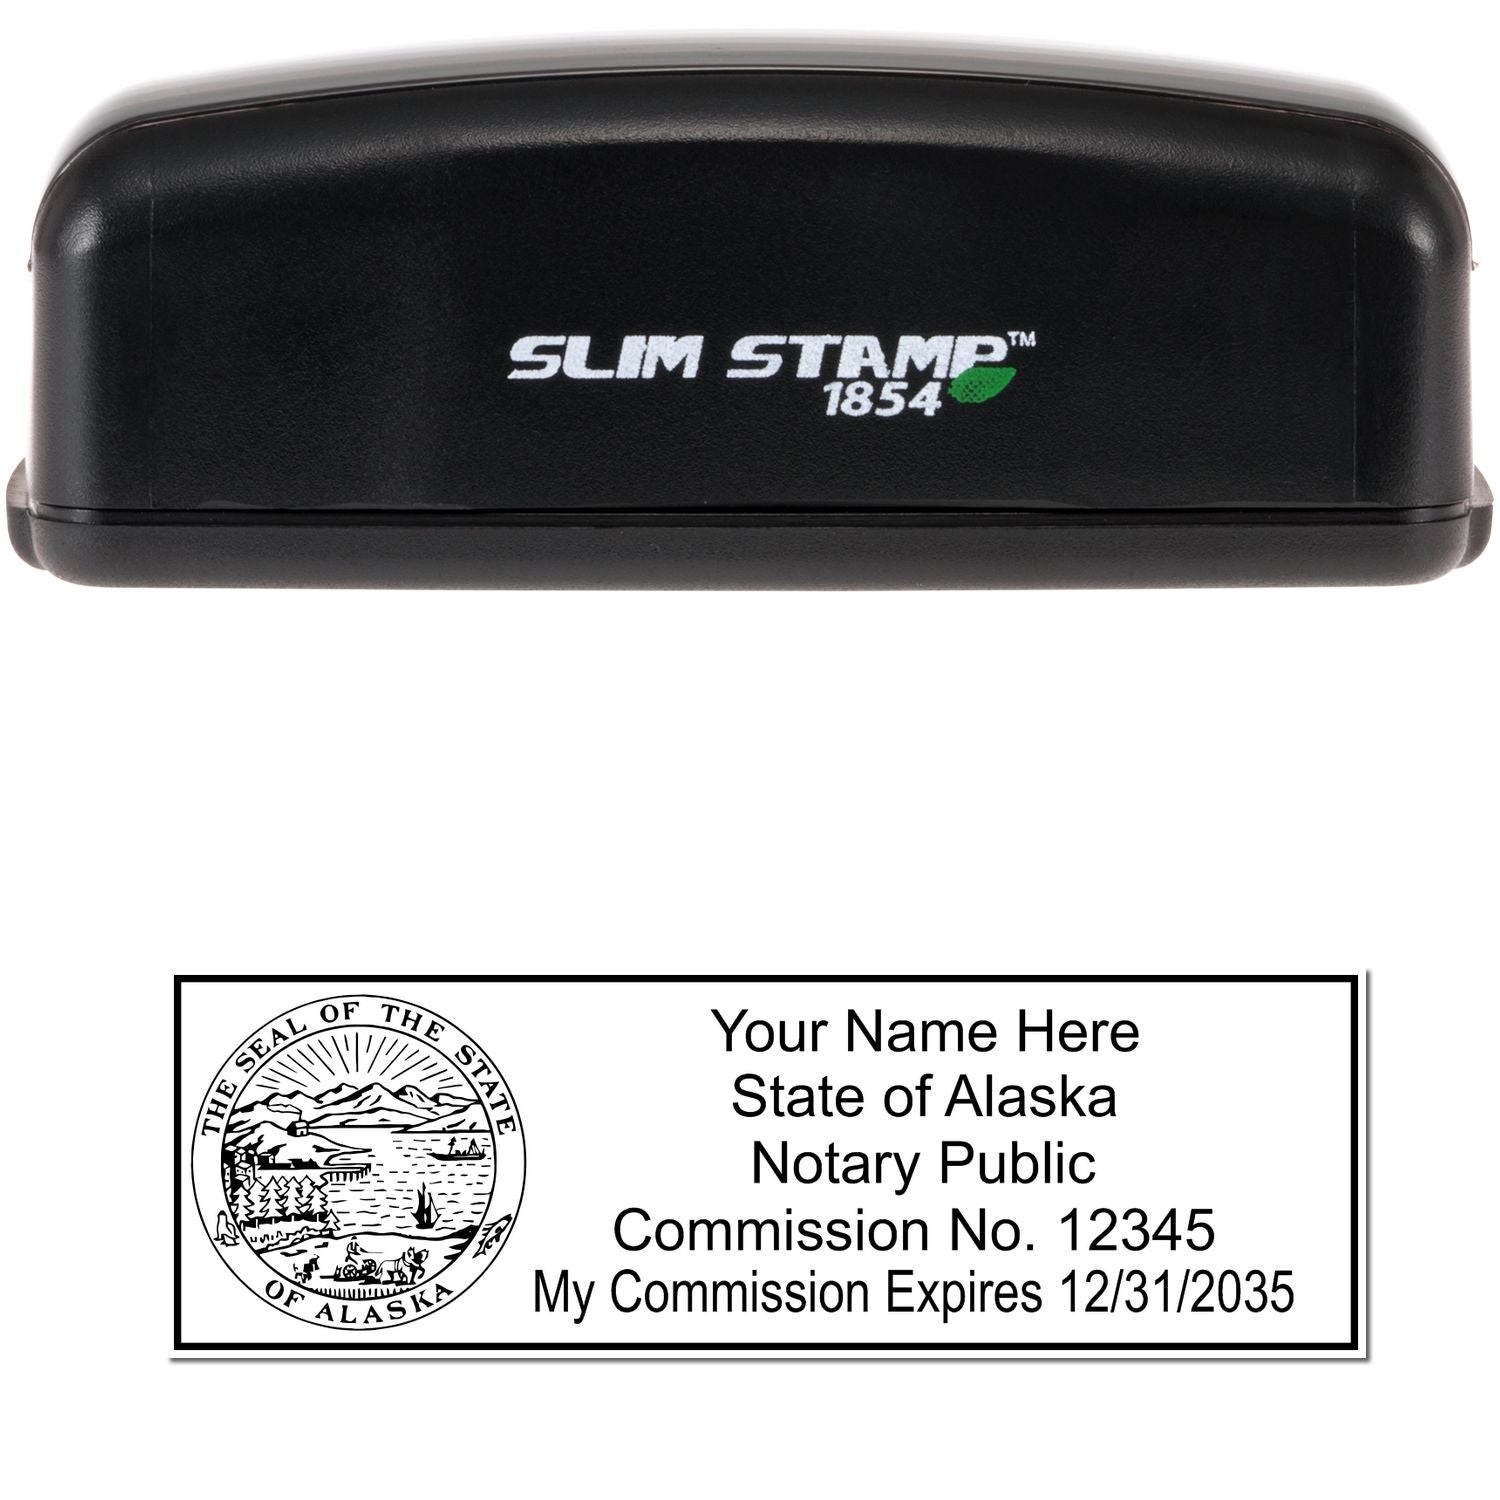 The main image for the Slim Pre-Inked State Seal Notary Stamp for Alaska depicting a sample of the imprint and electronic files